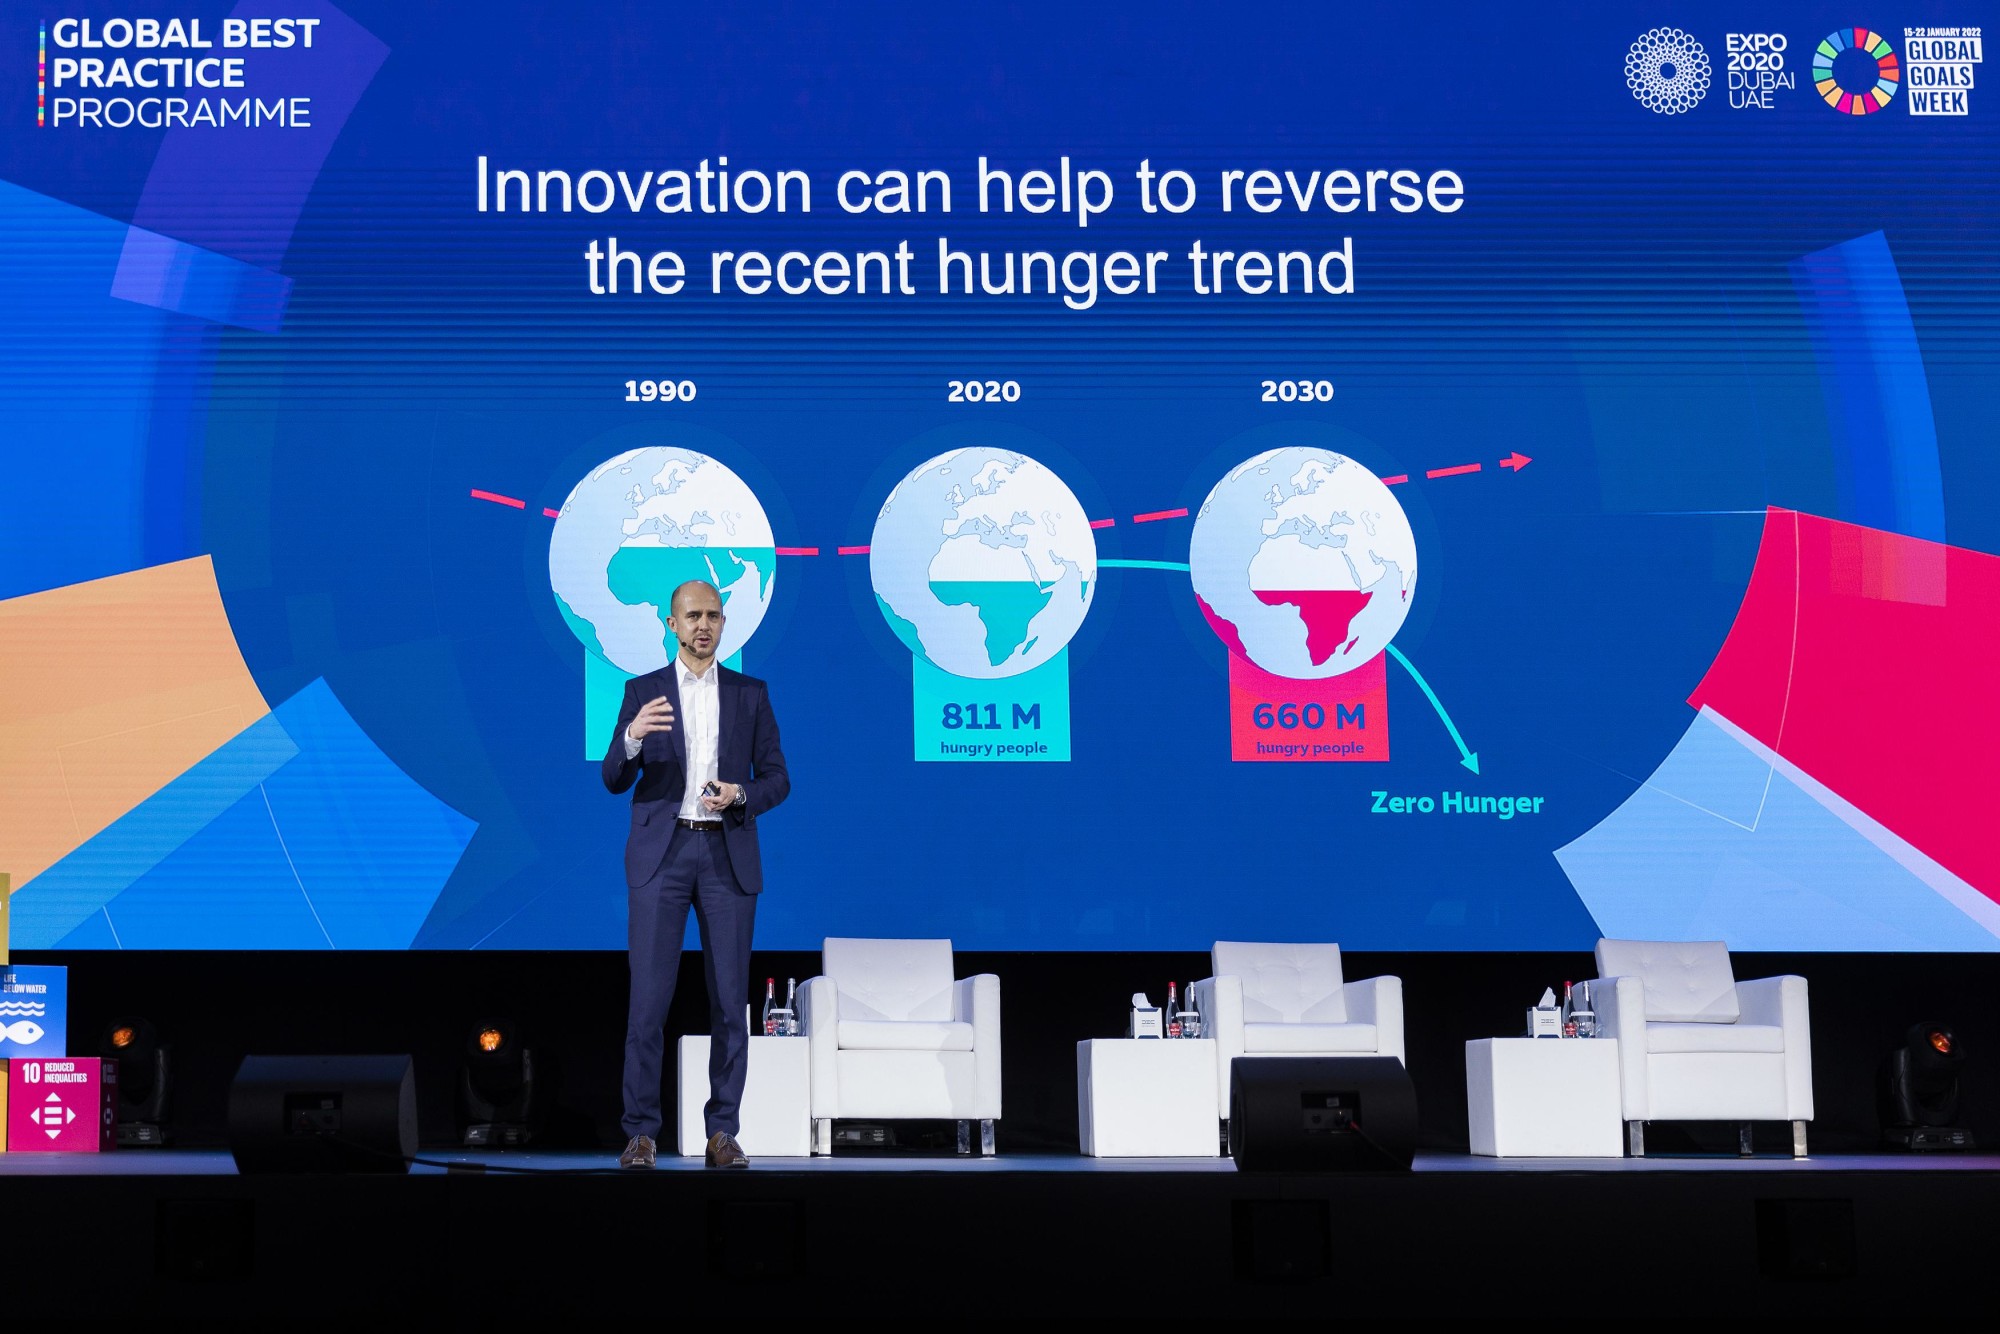 Bernhard Kowatsch, Head of the Innovations Accelerator at the United Nations World Food Programme (WFP) speaks during the Global Best Practice Programme Assembly at Dubai Exhibition Centre m35189